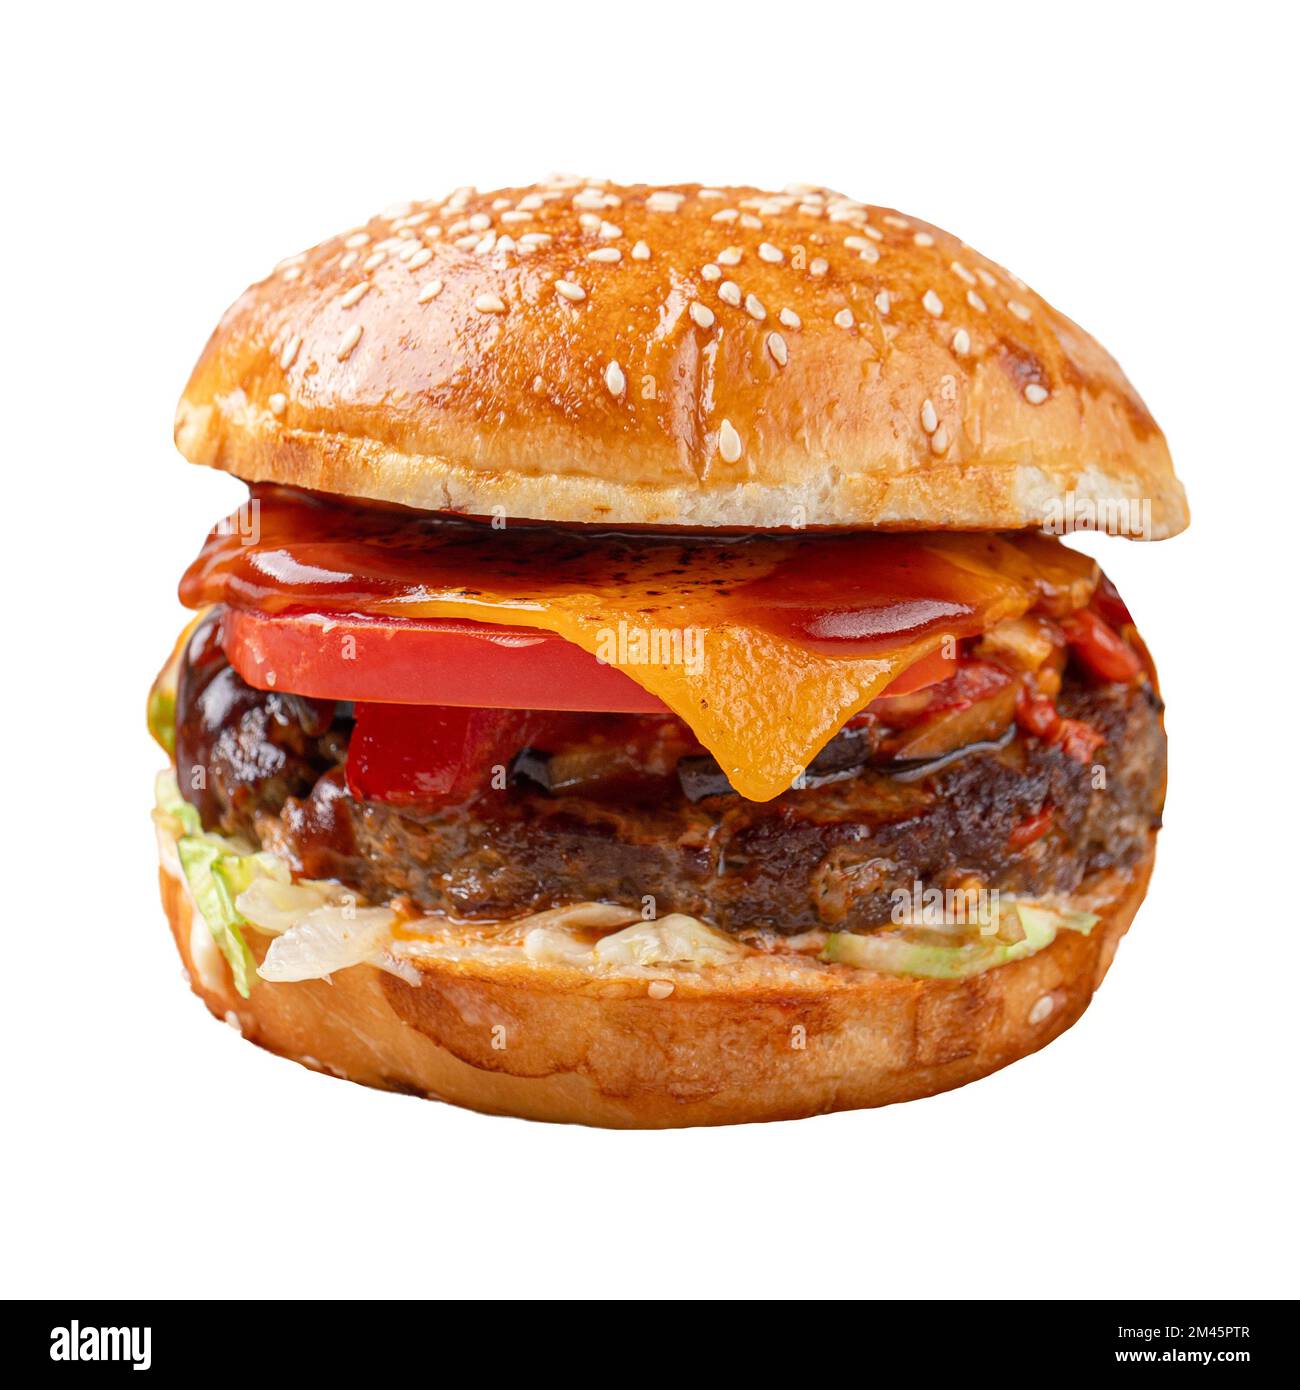 Isolated portion of american cheeseburger Stock Photo